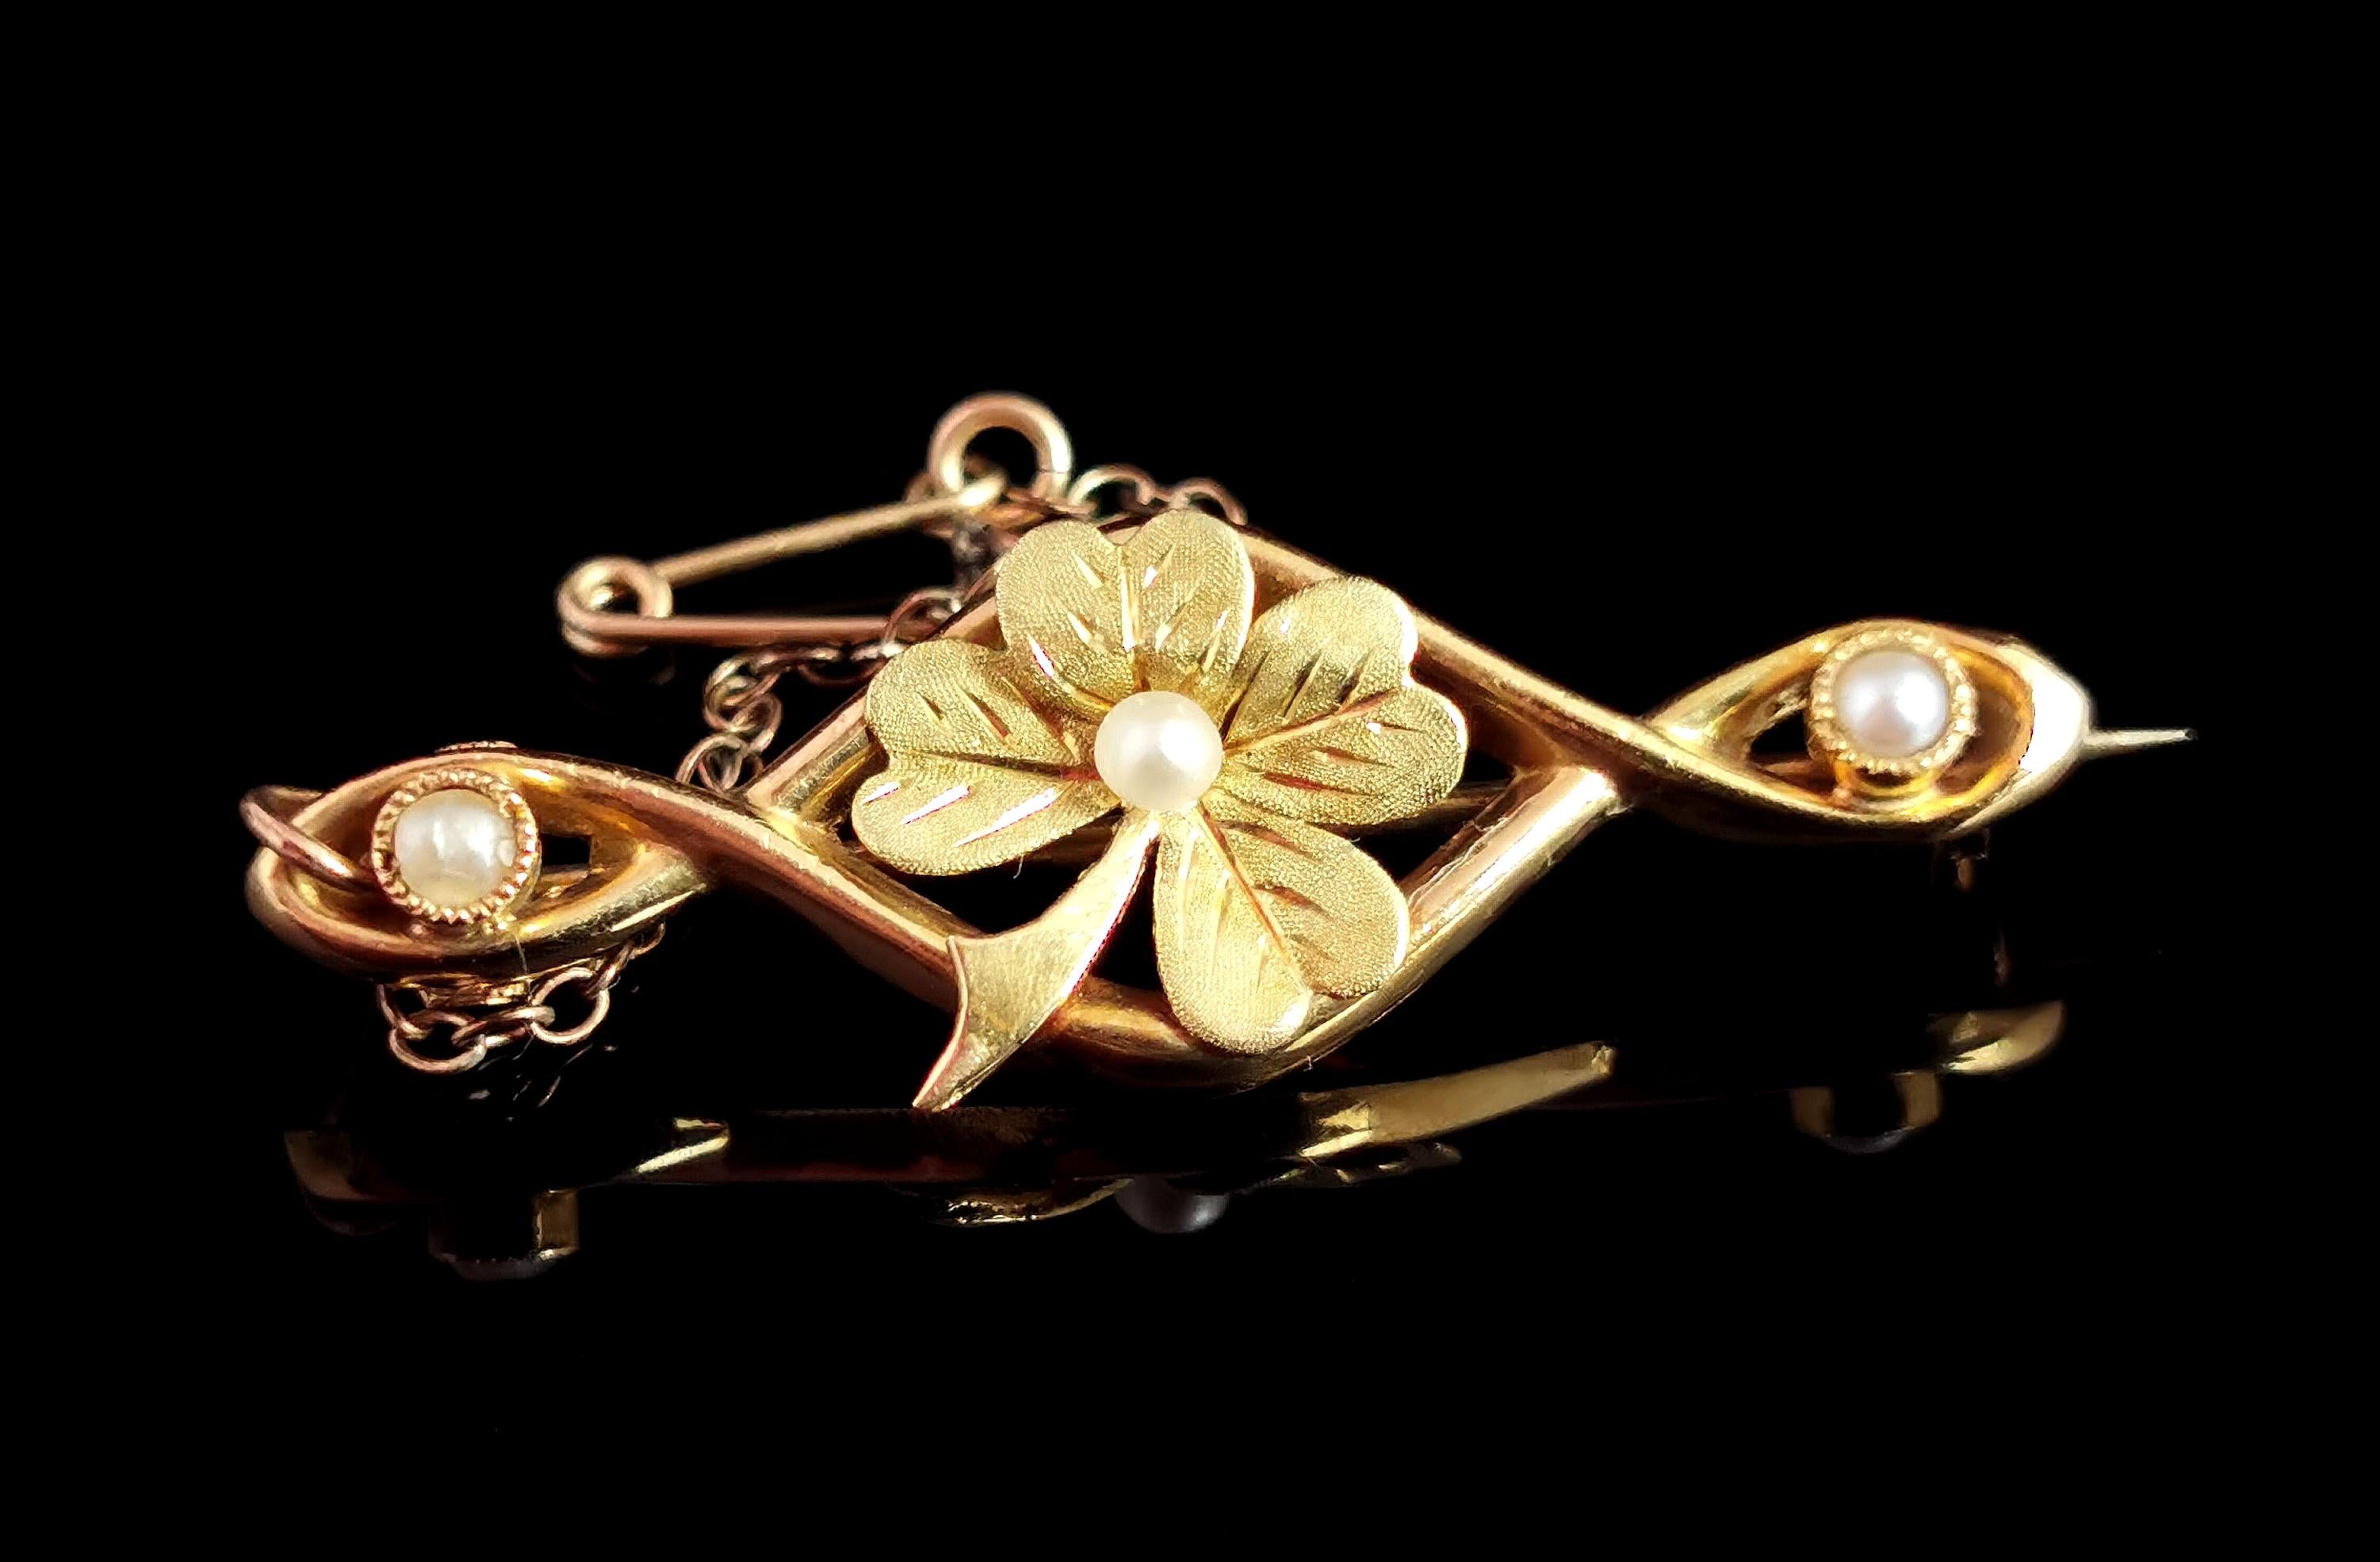 A very pretty antique, 9kt gold, seed pearl lucky shamrock or clover brooch.

A beautiful rich 9kt yellow gold Crossover bar brooch with twist detailing.

The centre features a textured four leaf shamrock or clover set with a single seed pearl to